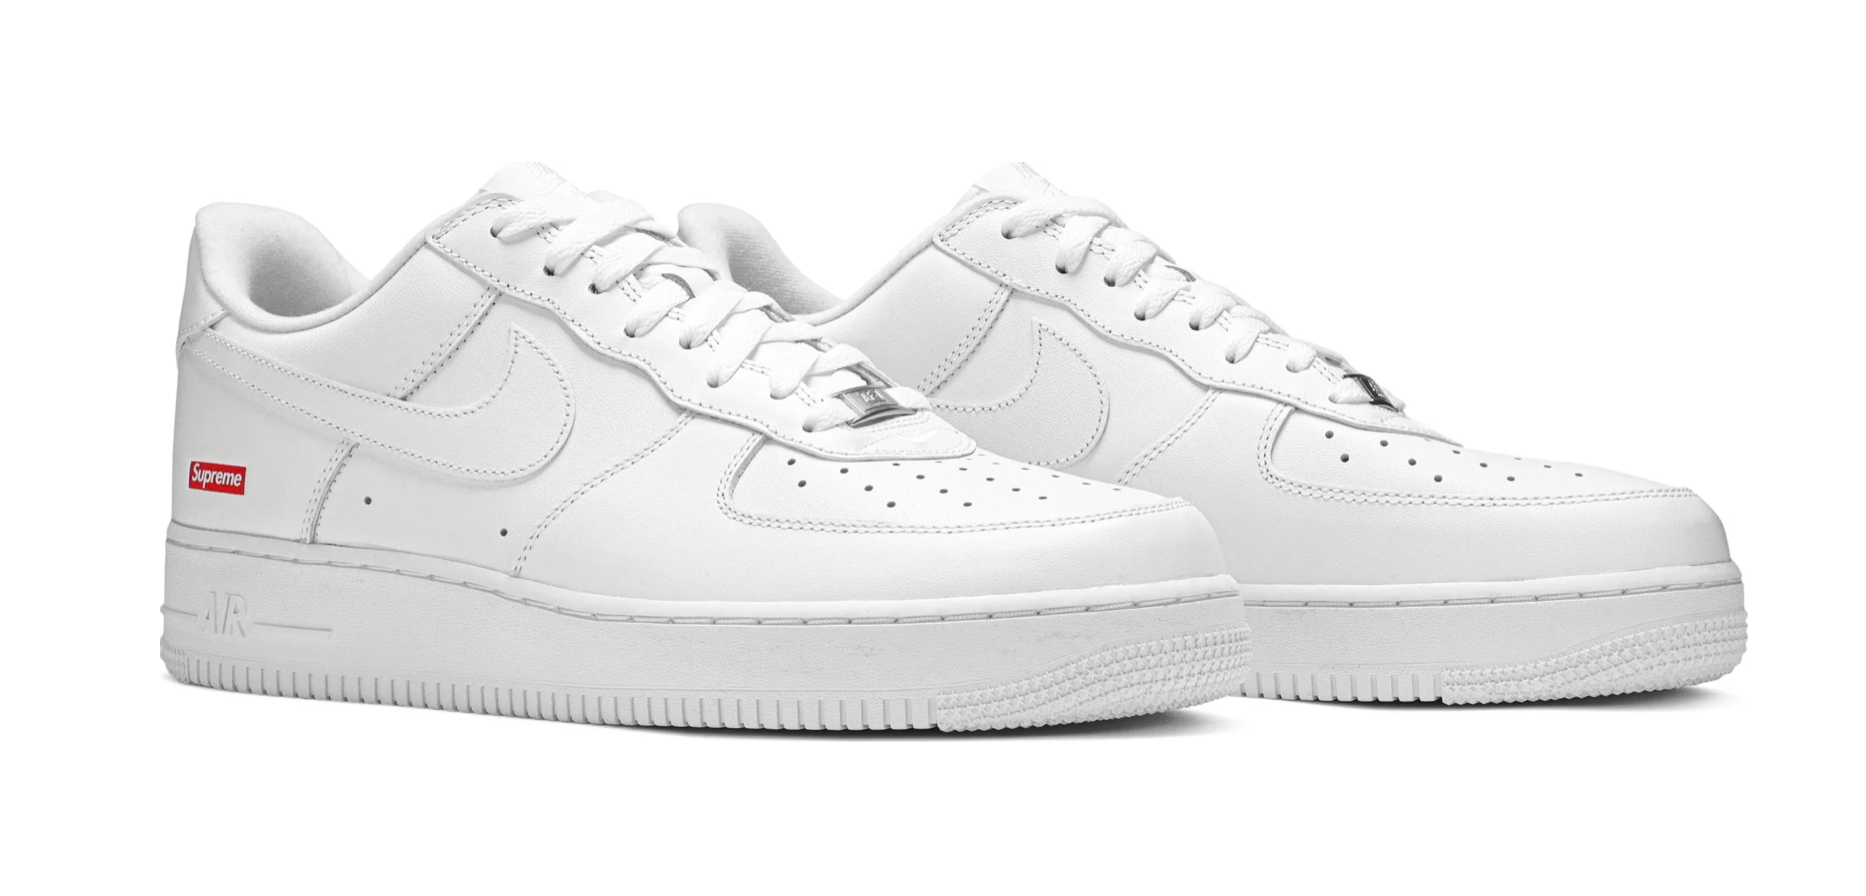 NIKE AIR FORCE 1 LOW SUPREME WEISS